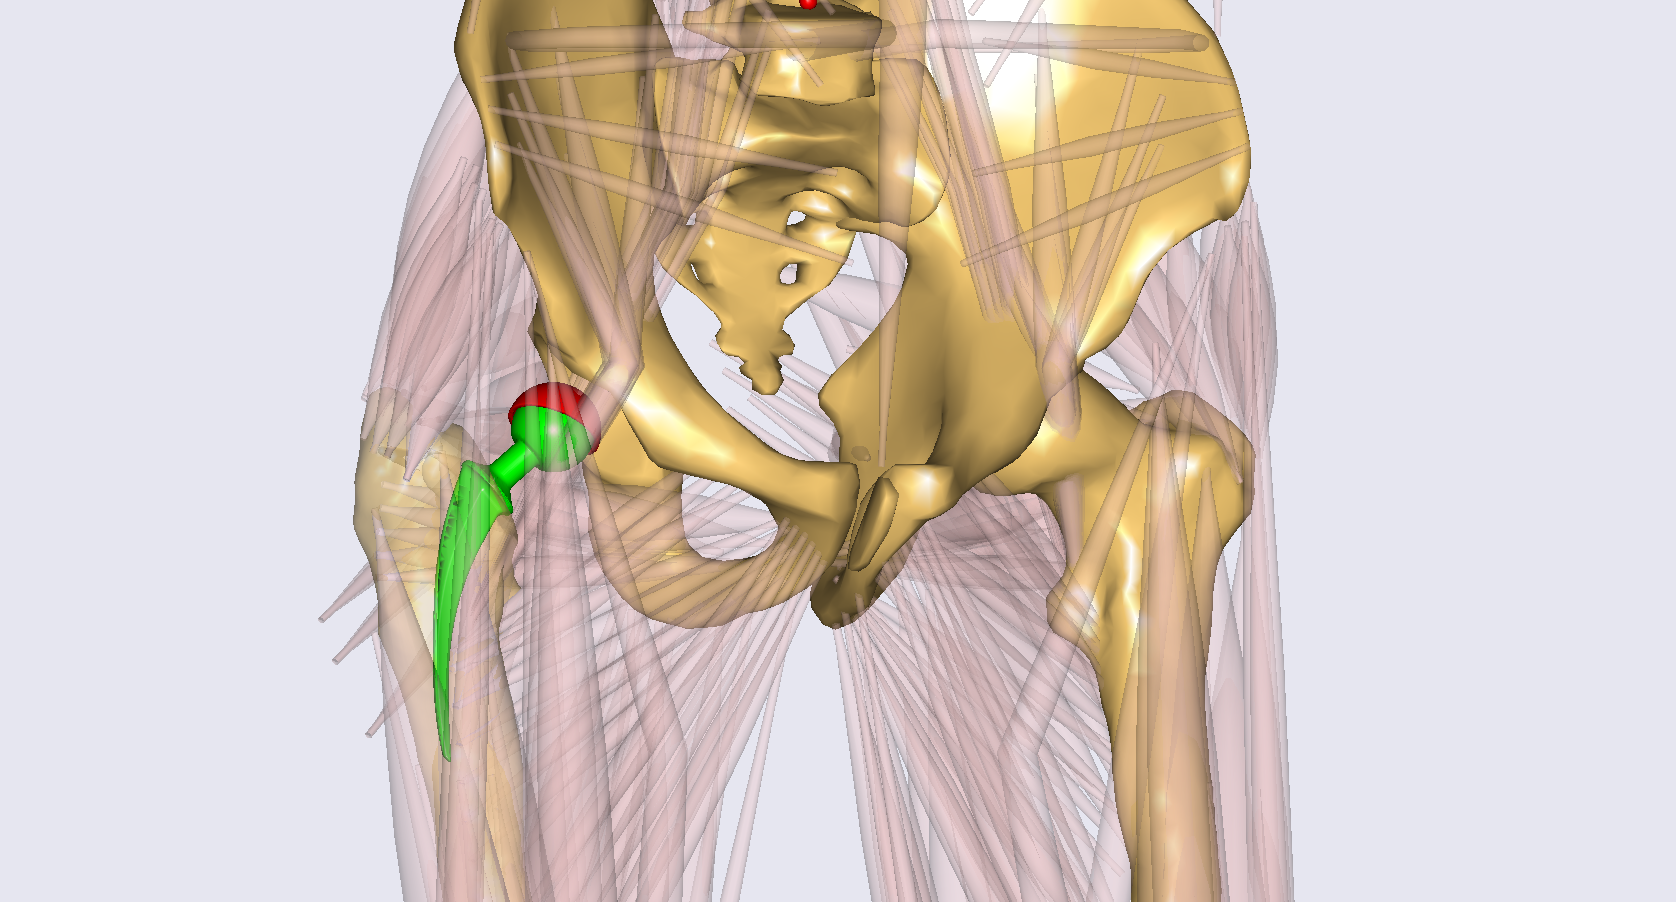 Enlarged view: Next generation Hip replacement